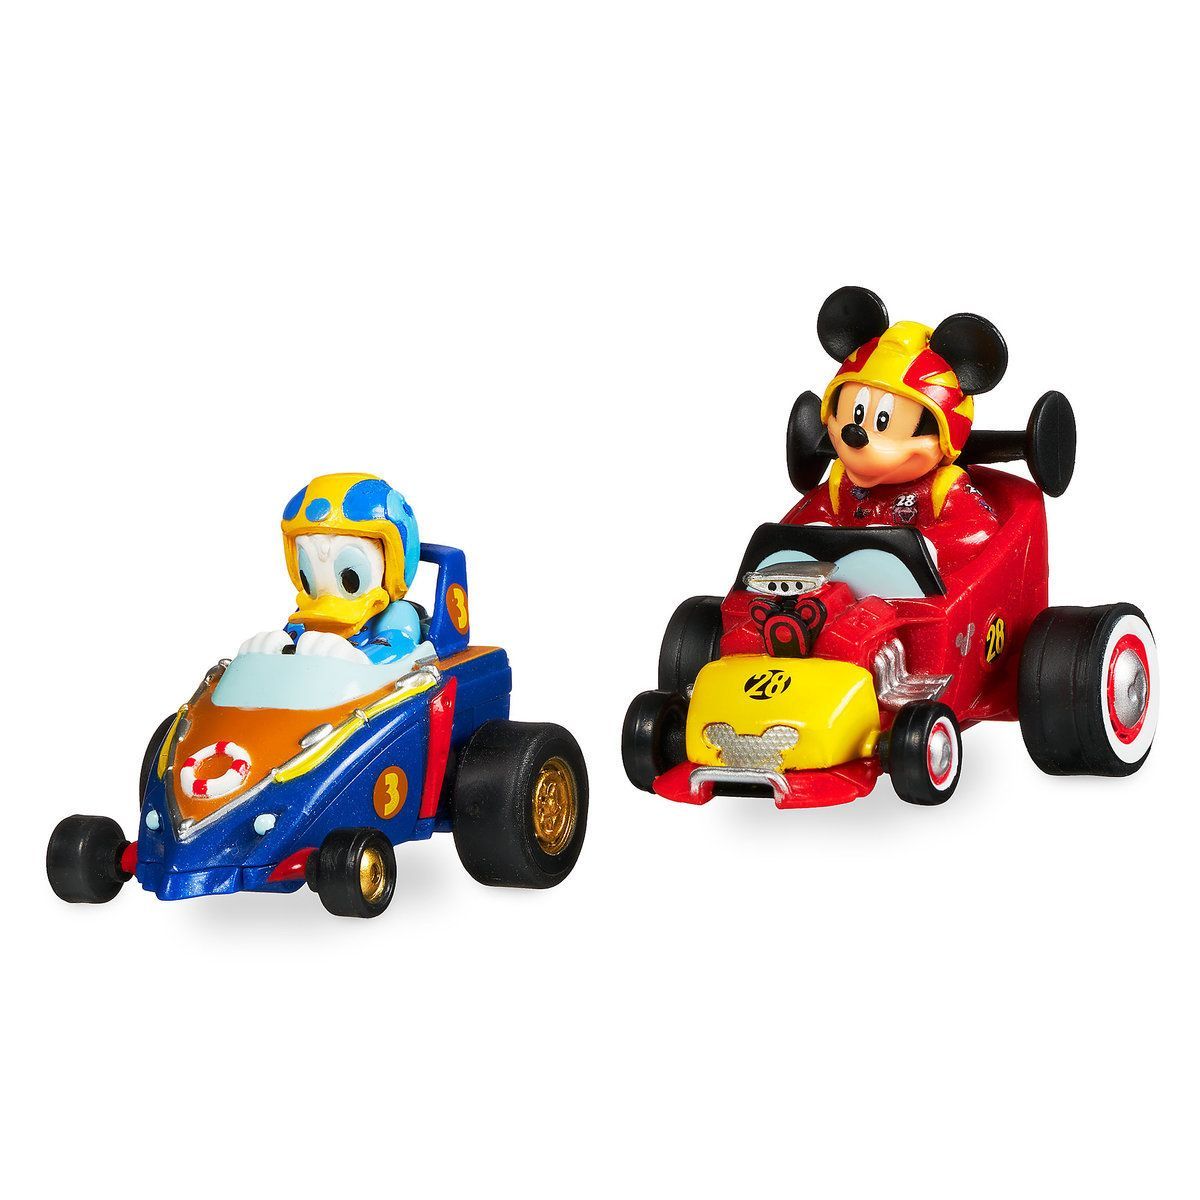 Mickey and the Roadster Racers Pullback Racers Set Mouse & Donald Duck. Disney merchandise, Disney store, Disney shop